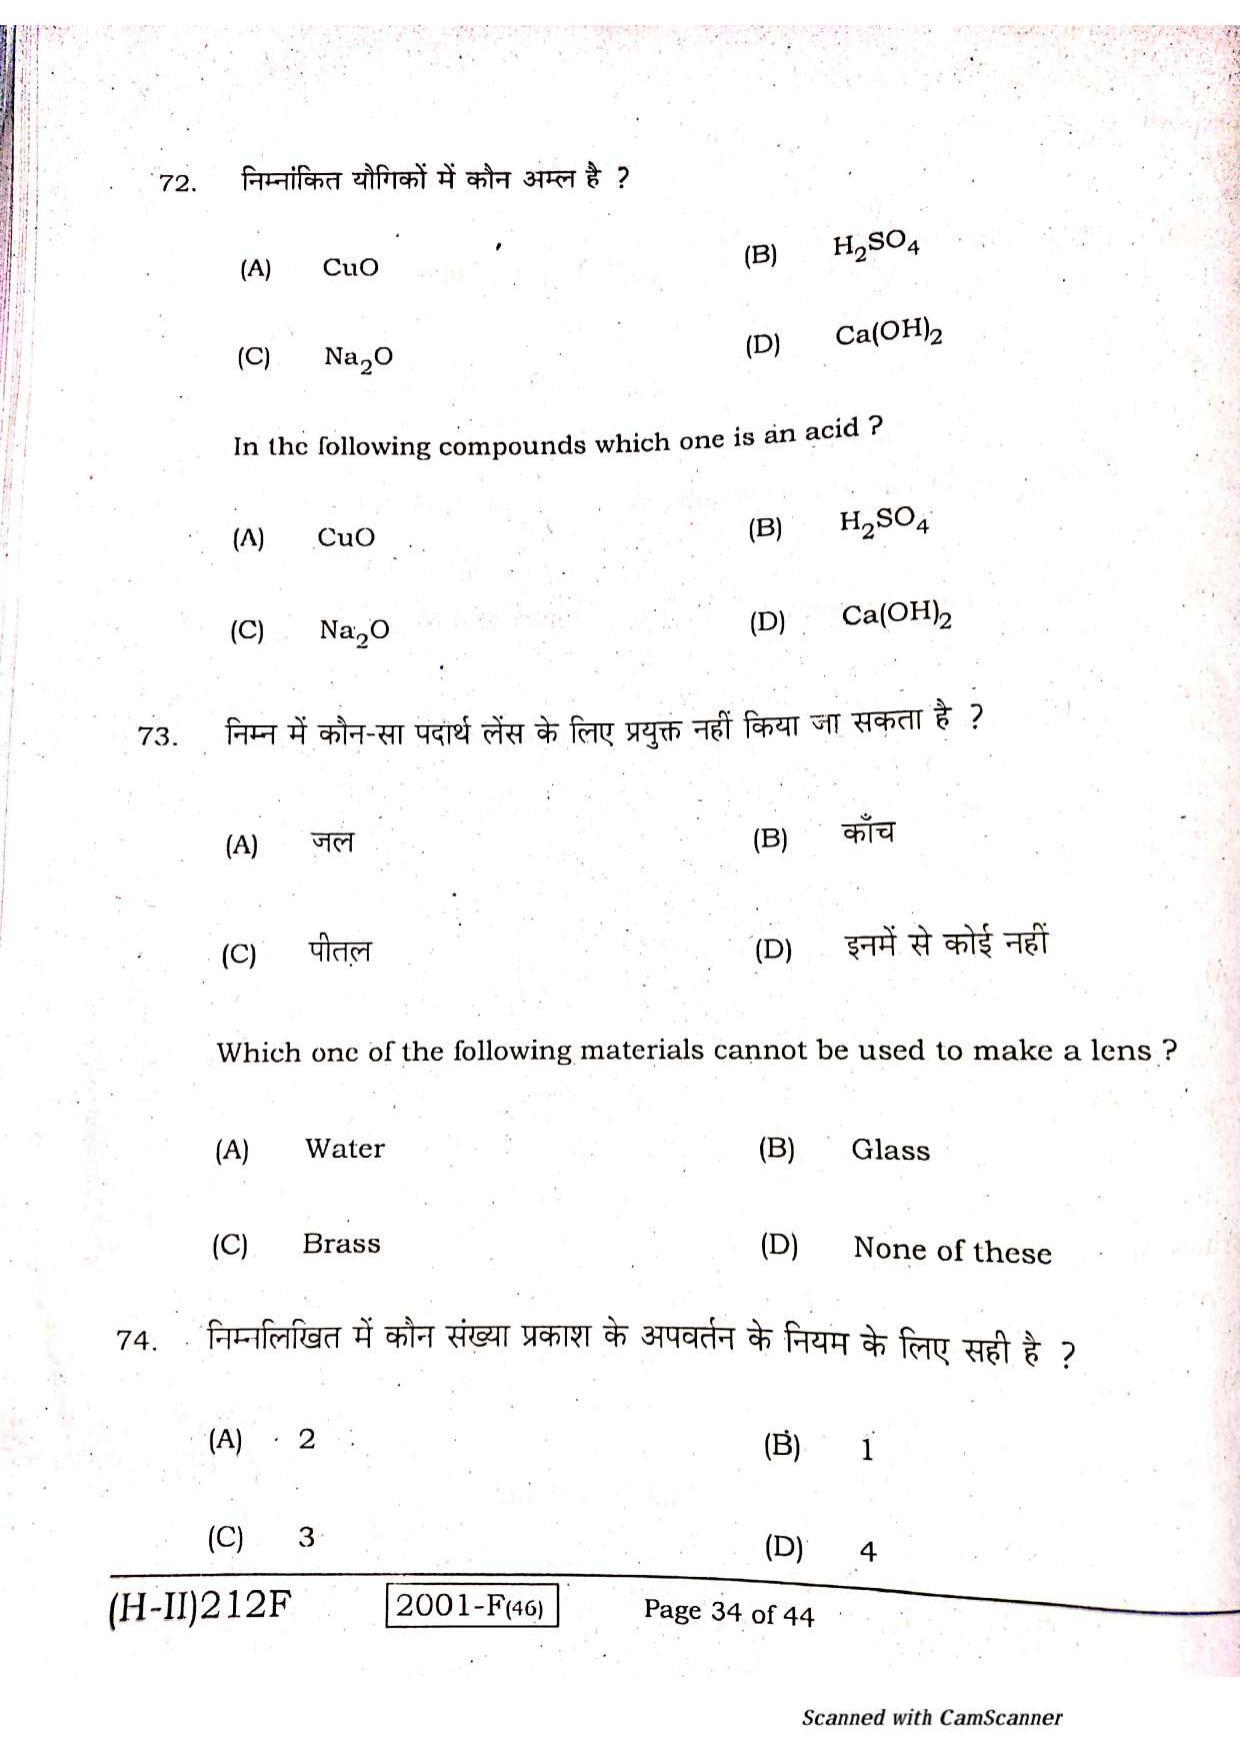 Bihar Board Class 10 Science 2021 (2nd Sitting) Question Paper - Page 32